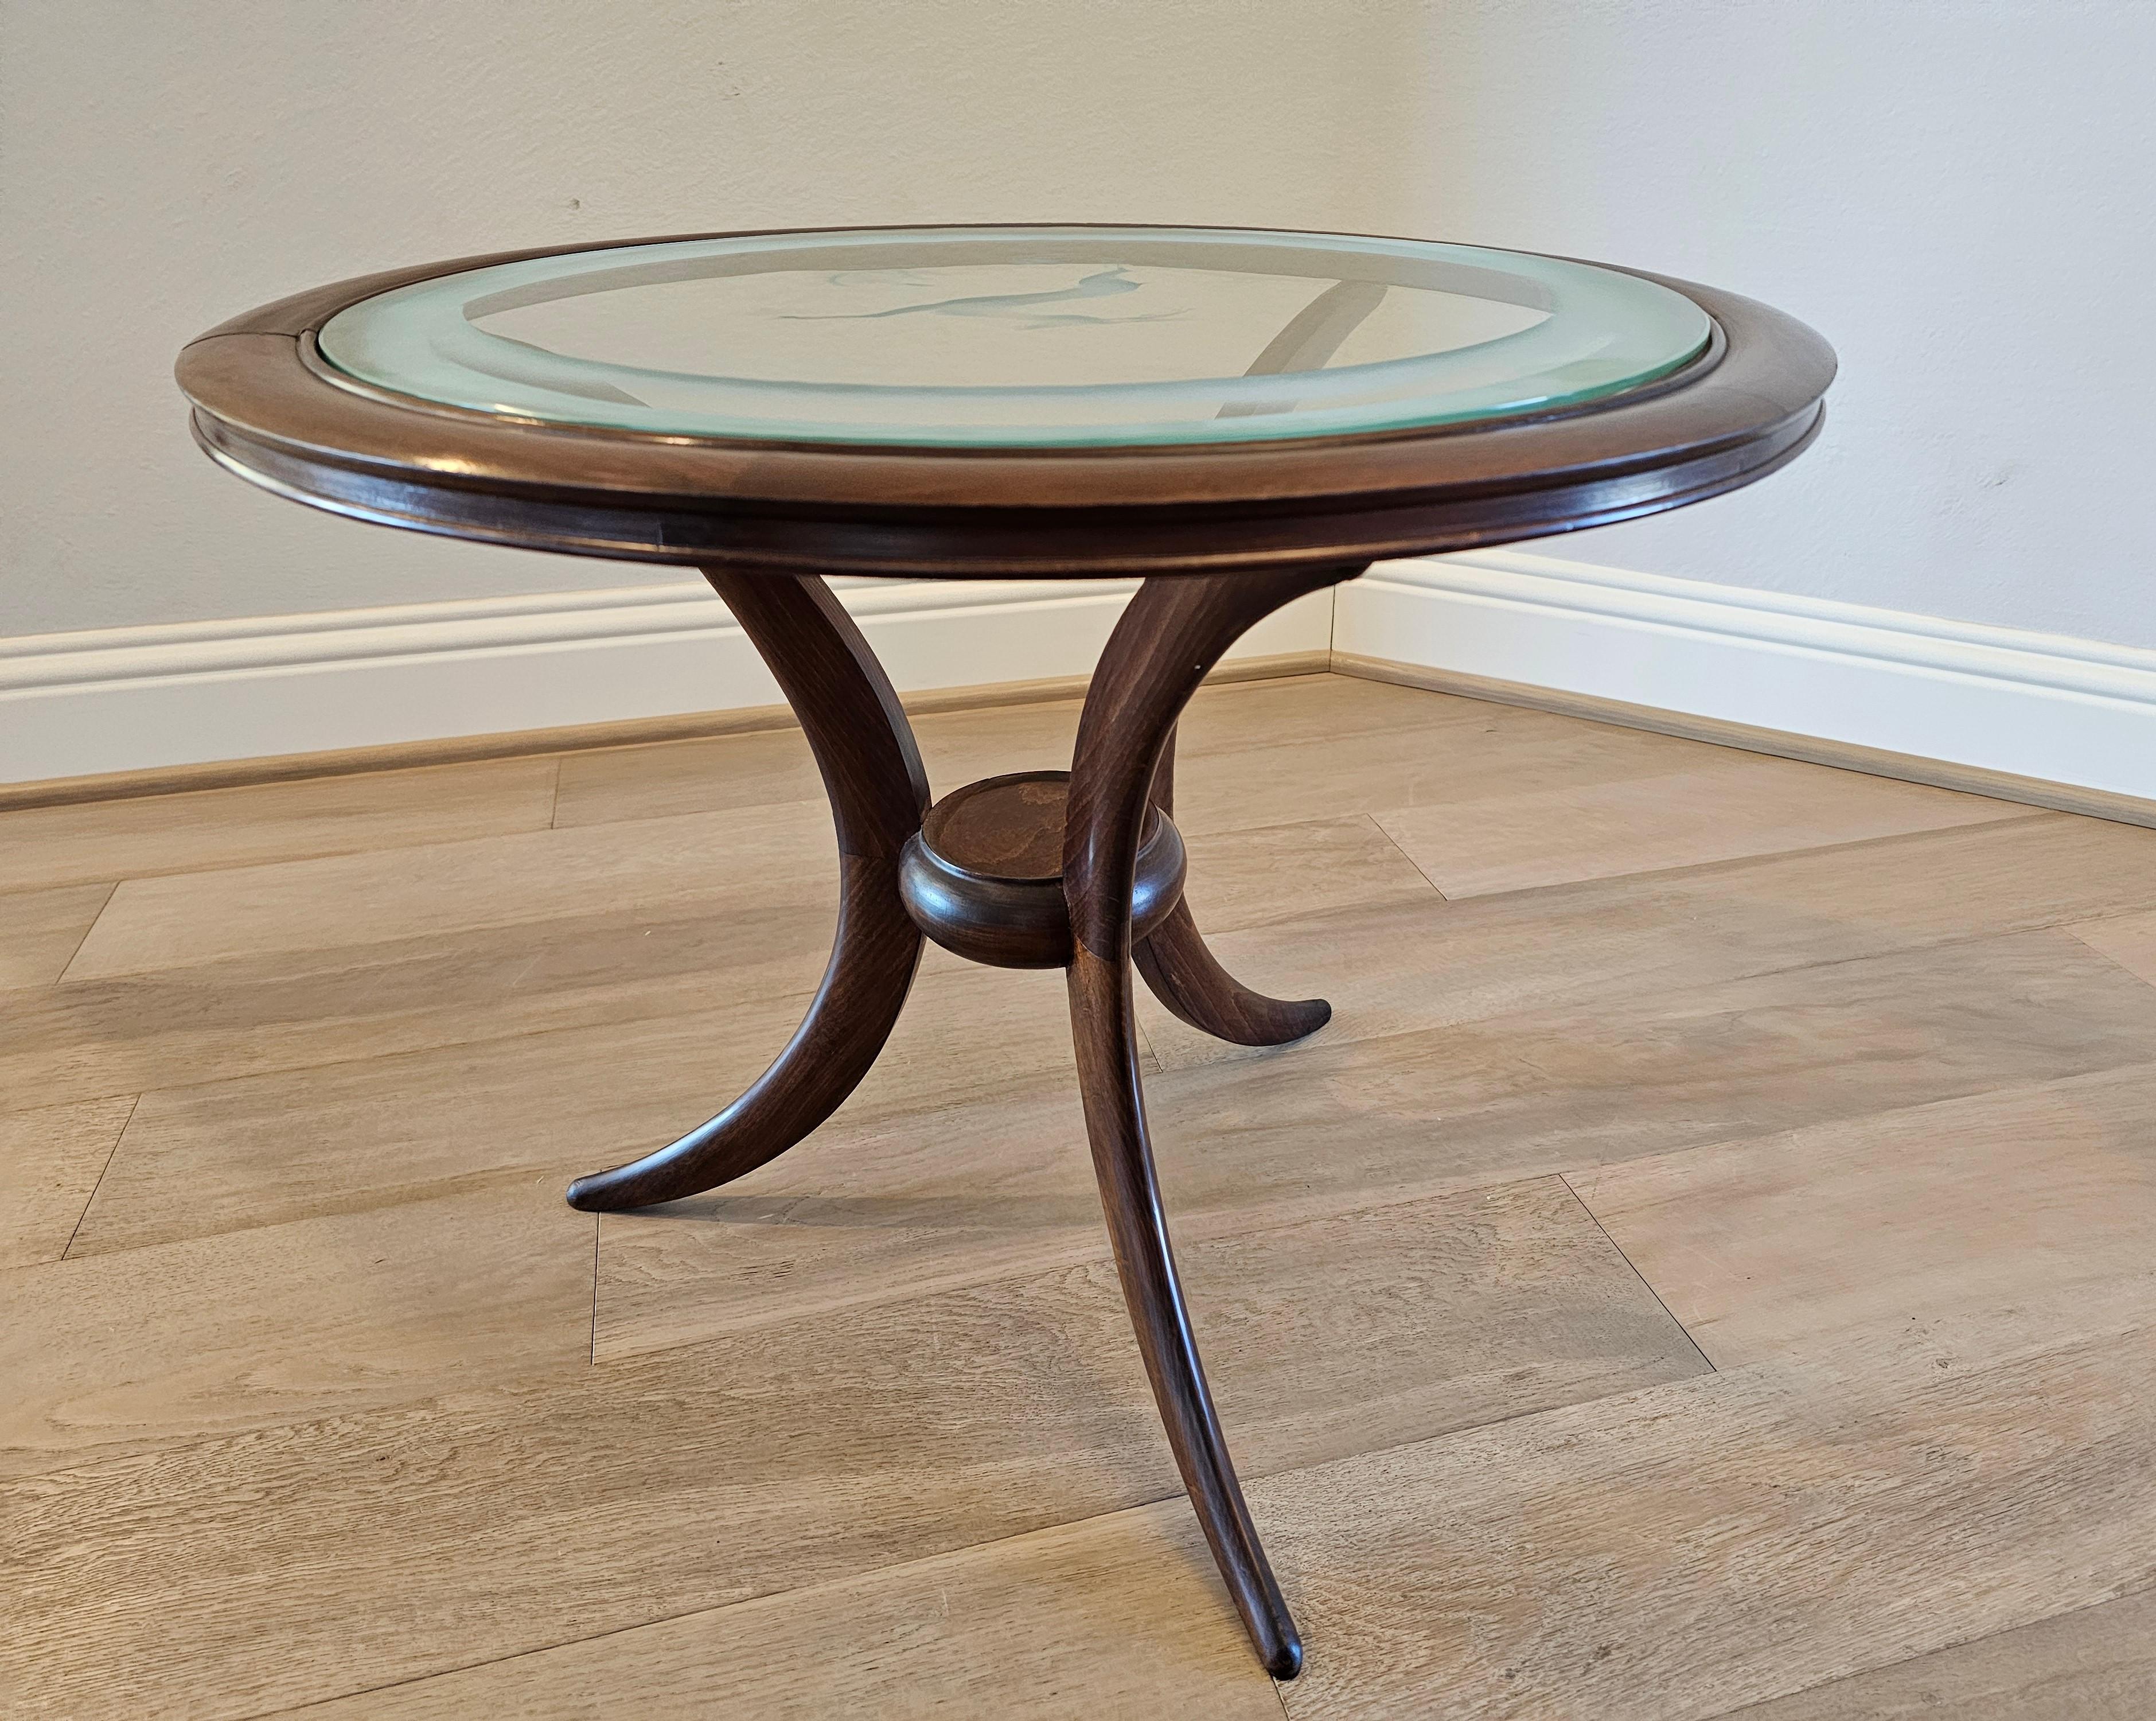 1940s Italian Mid-Century Modern Round Etched Glass Side Table  For Sale 2